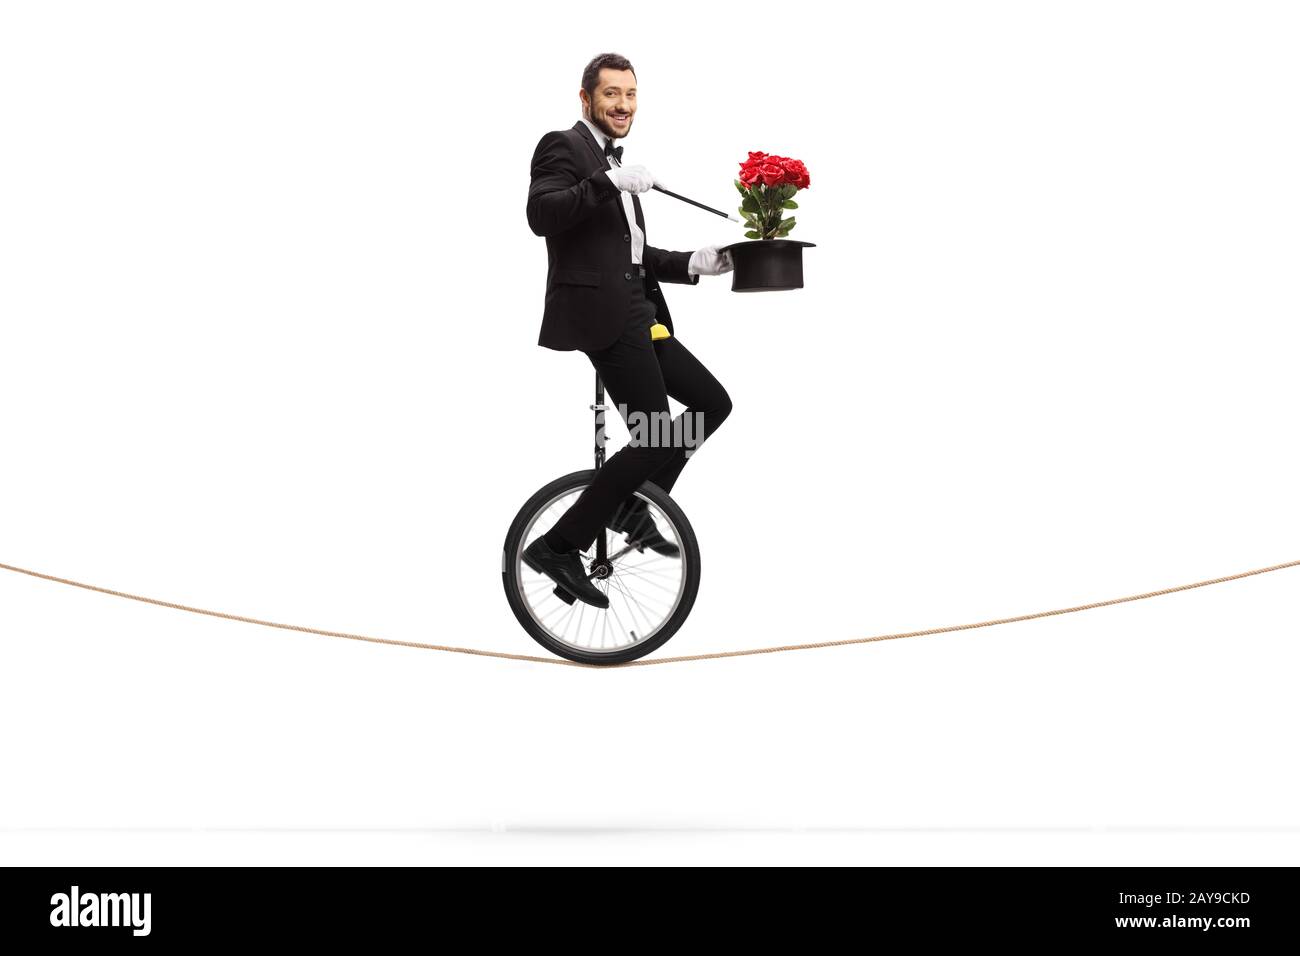 Magician performing a trick with red roses and riding a unicycle on a rope isolated on white background Stock Photo